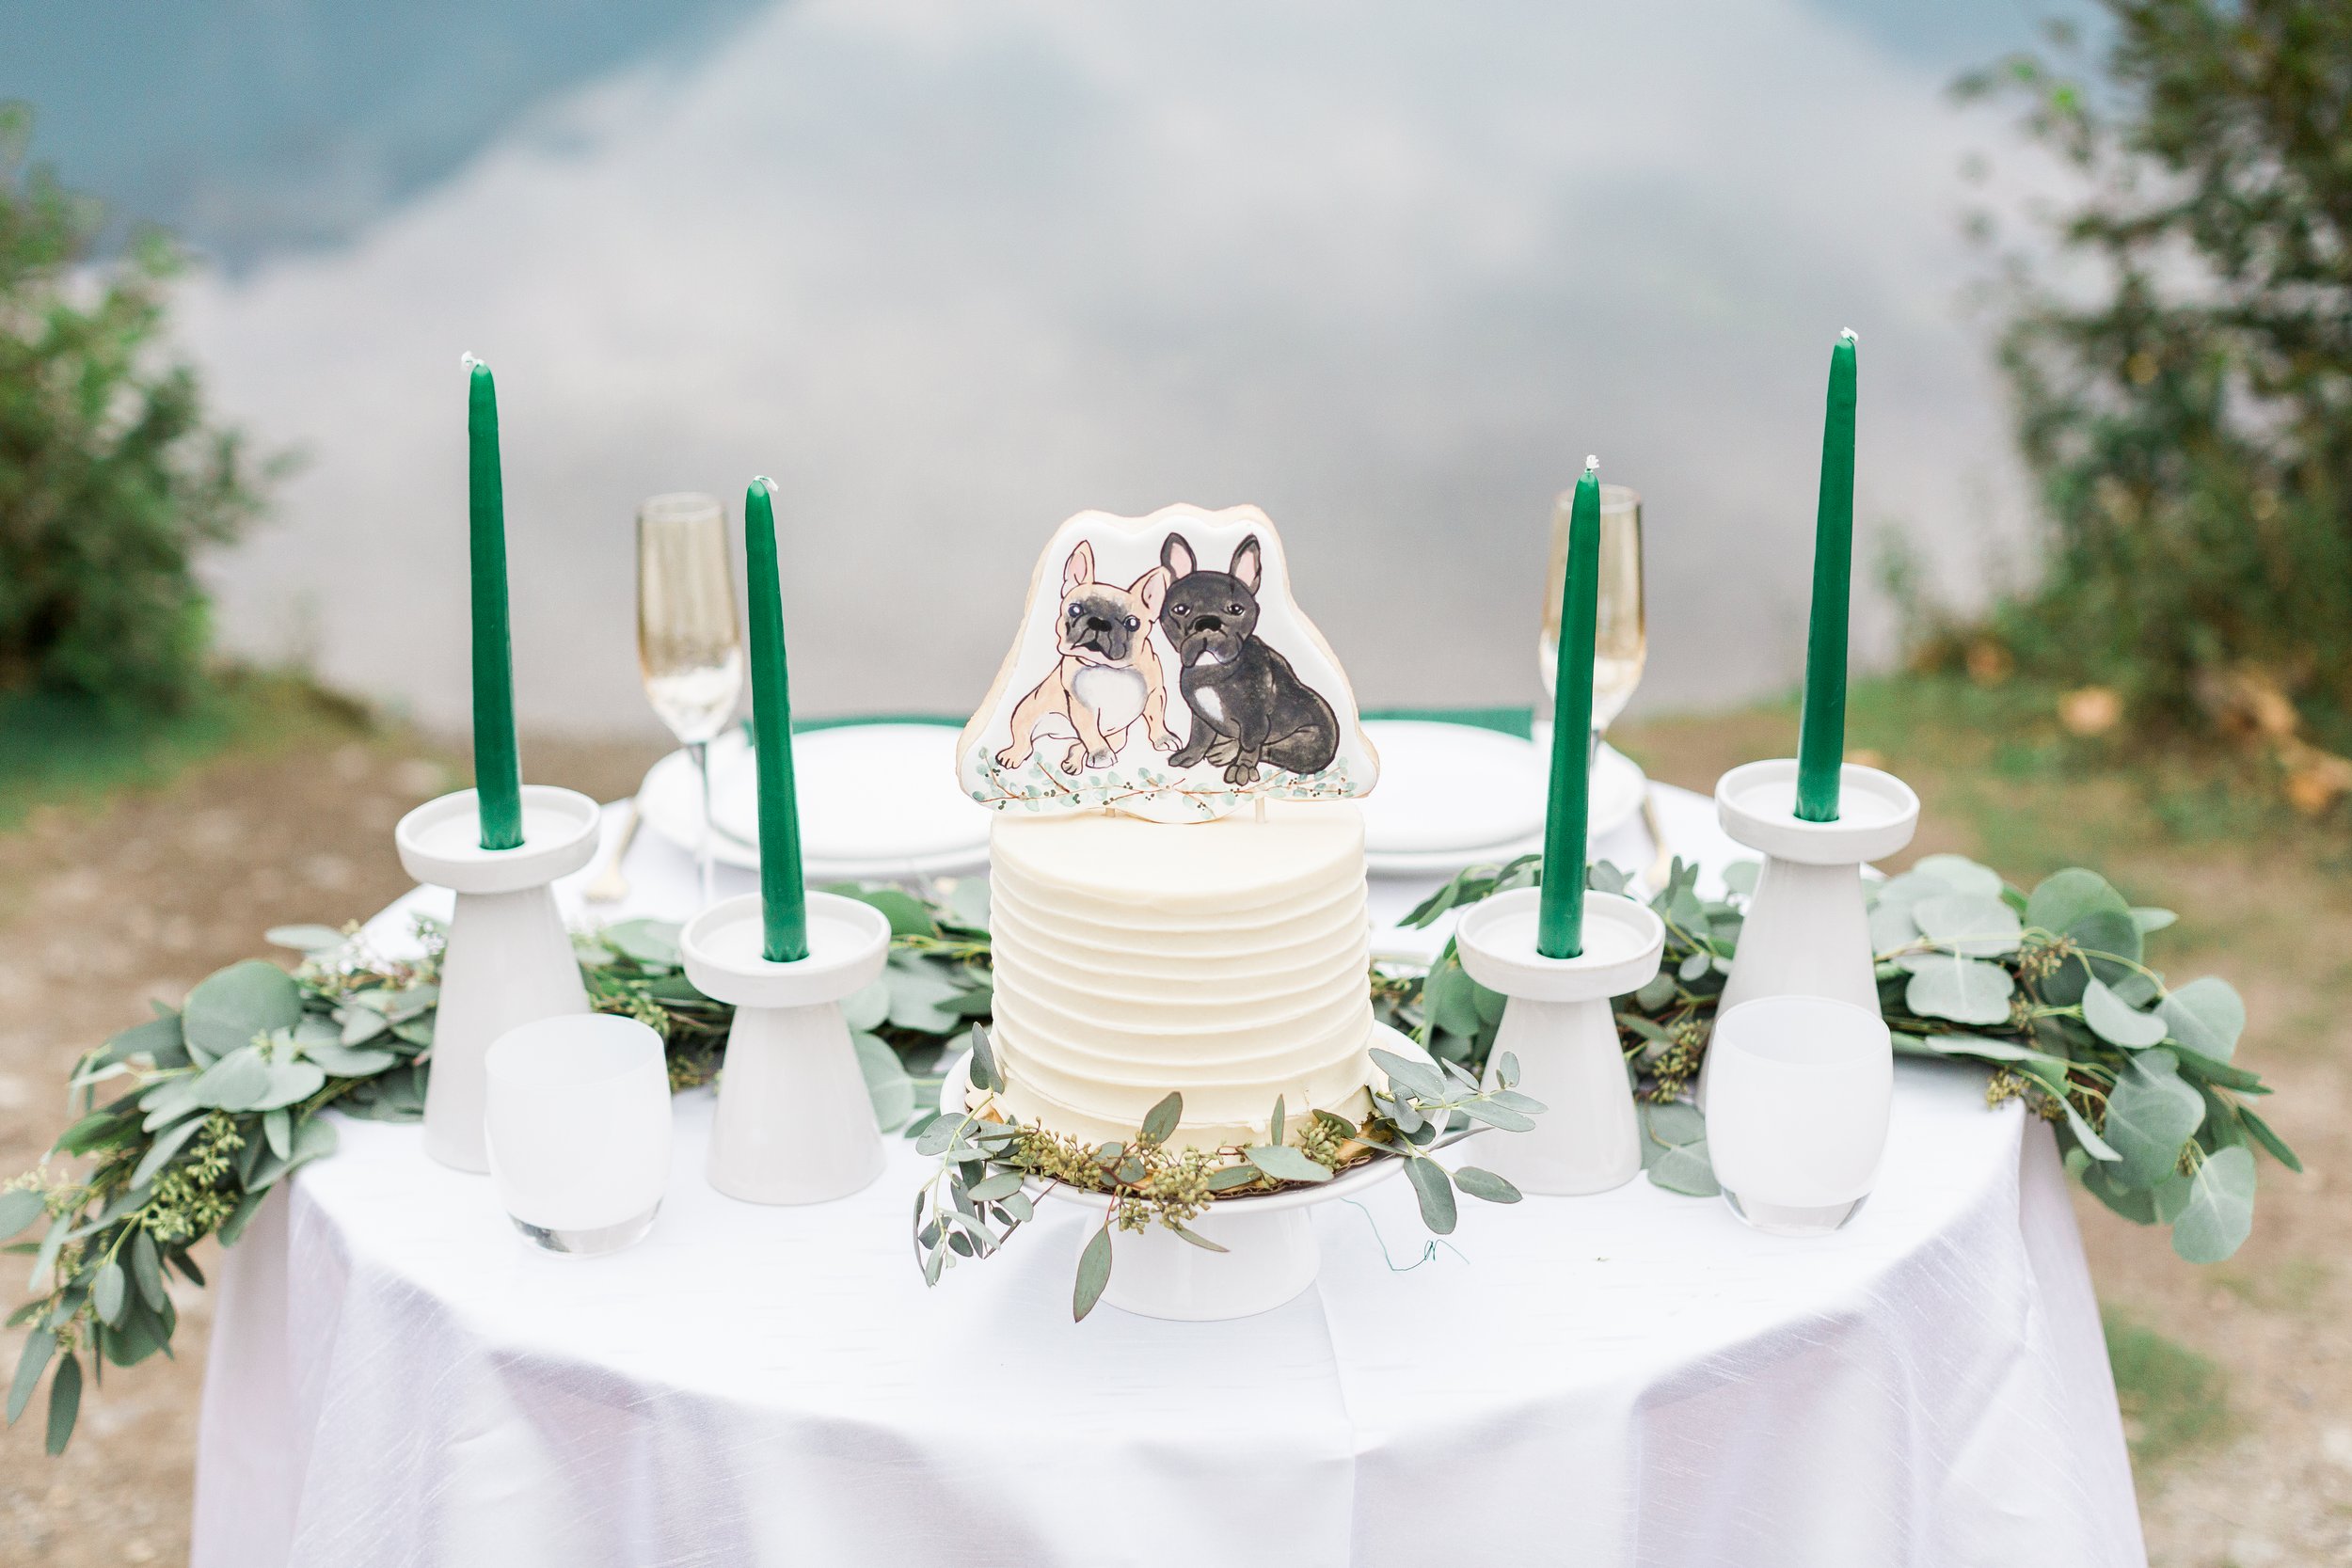  A personalized wedding cake topper that features your dogs 